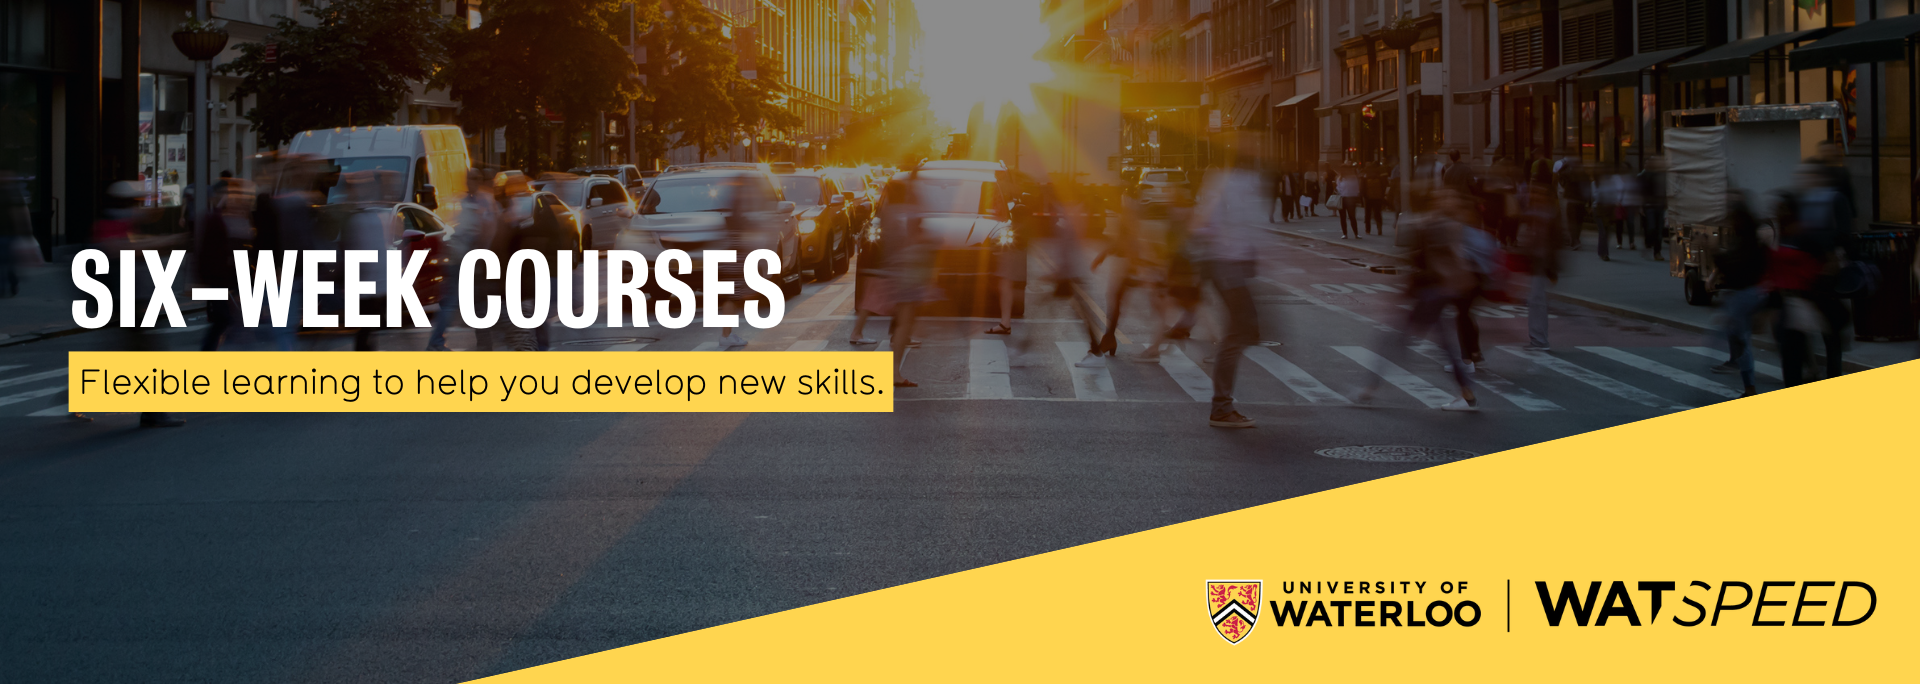 Six-week courses. Flexible learning to help you develop new skills.